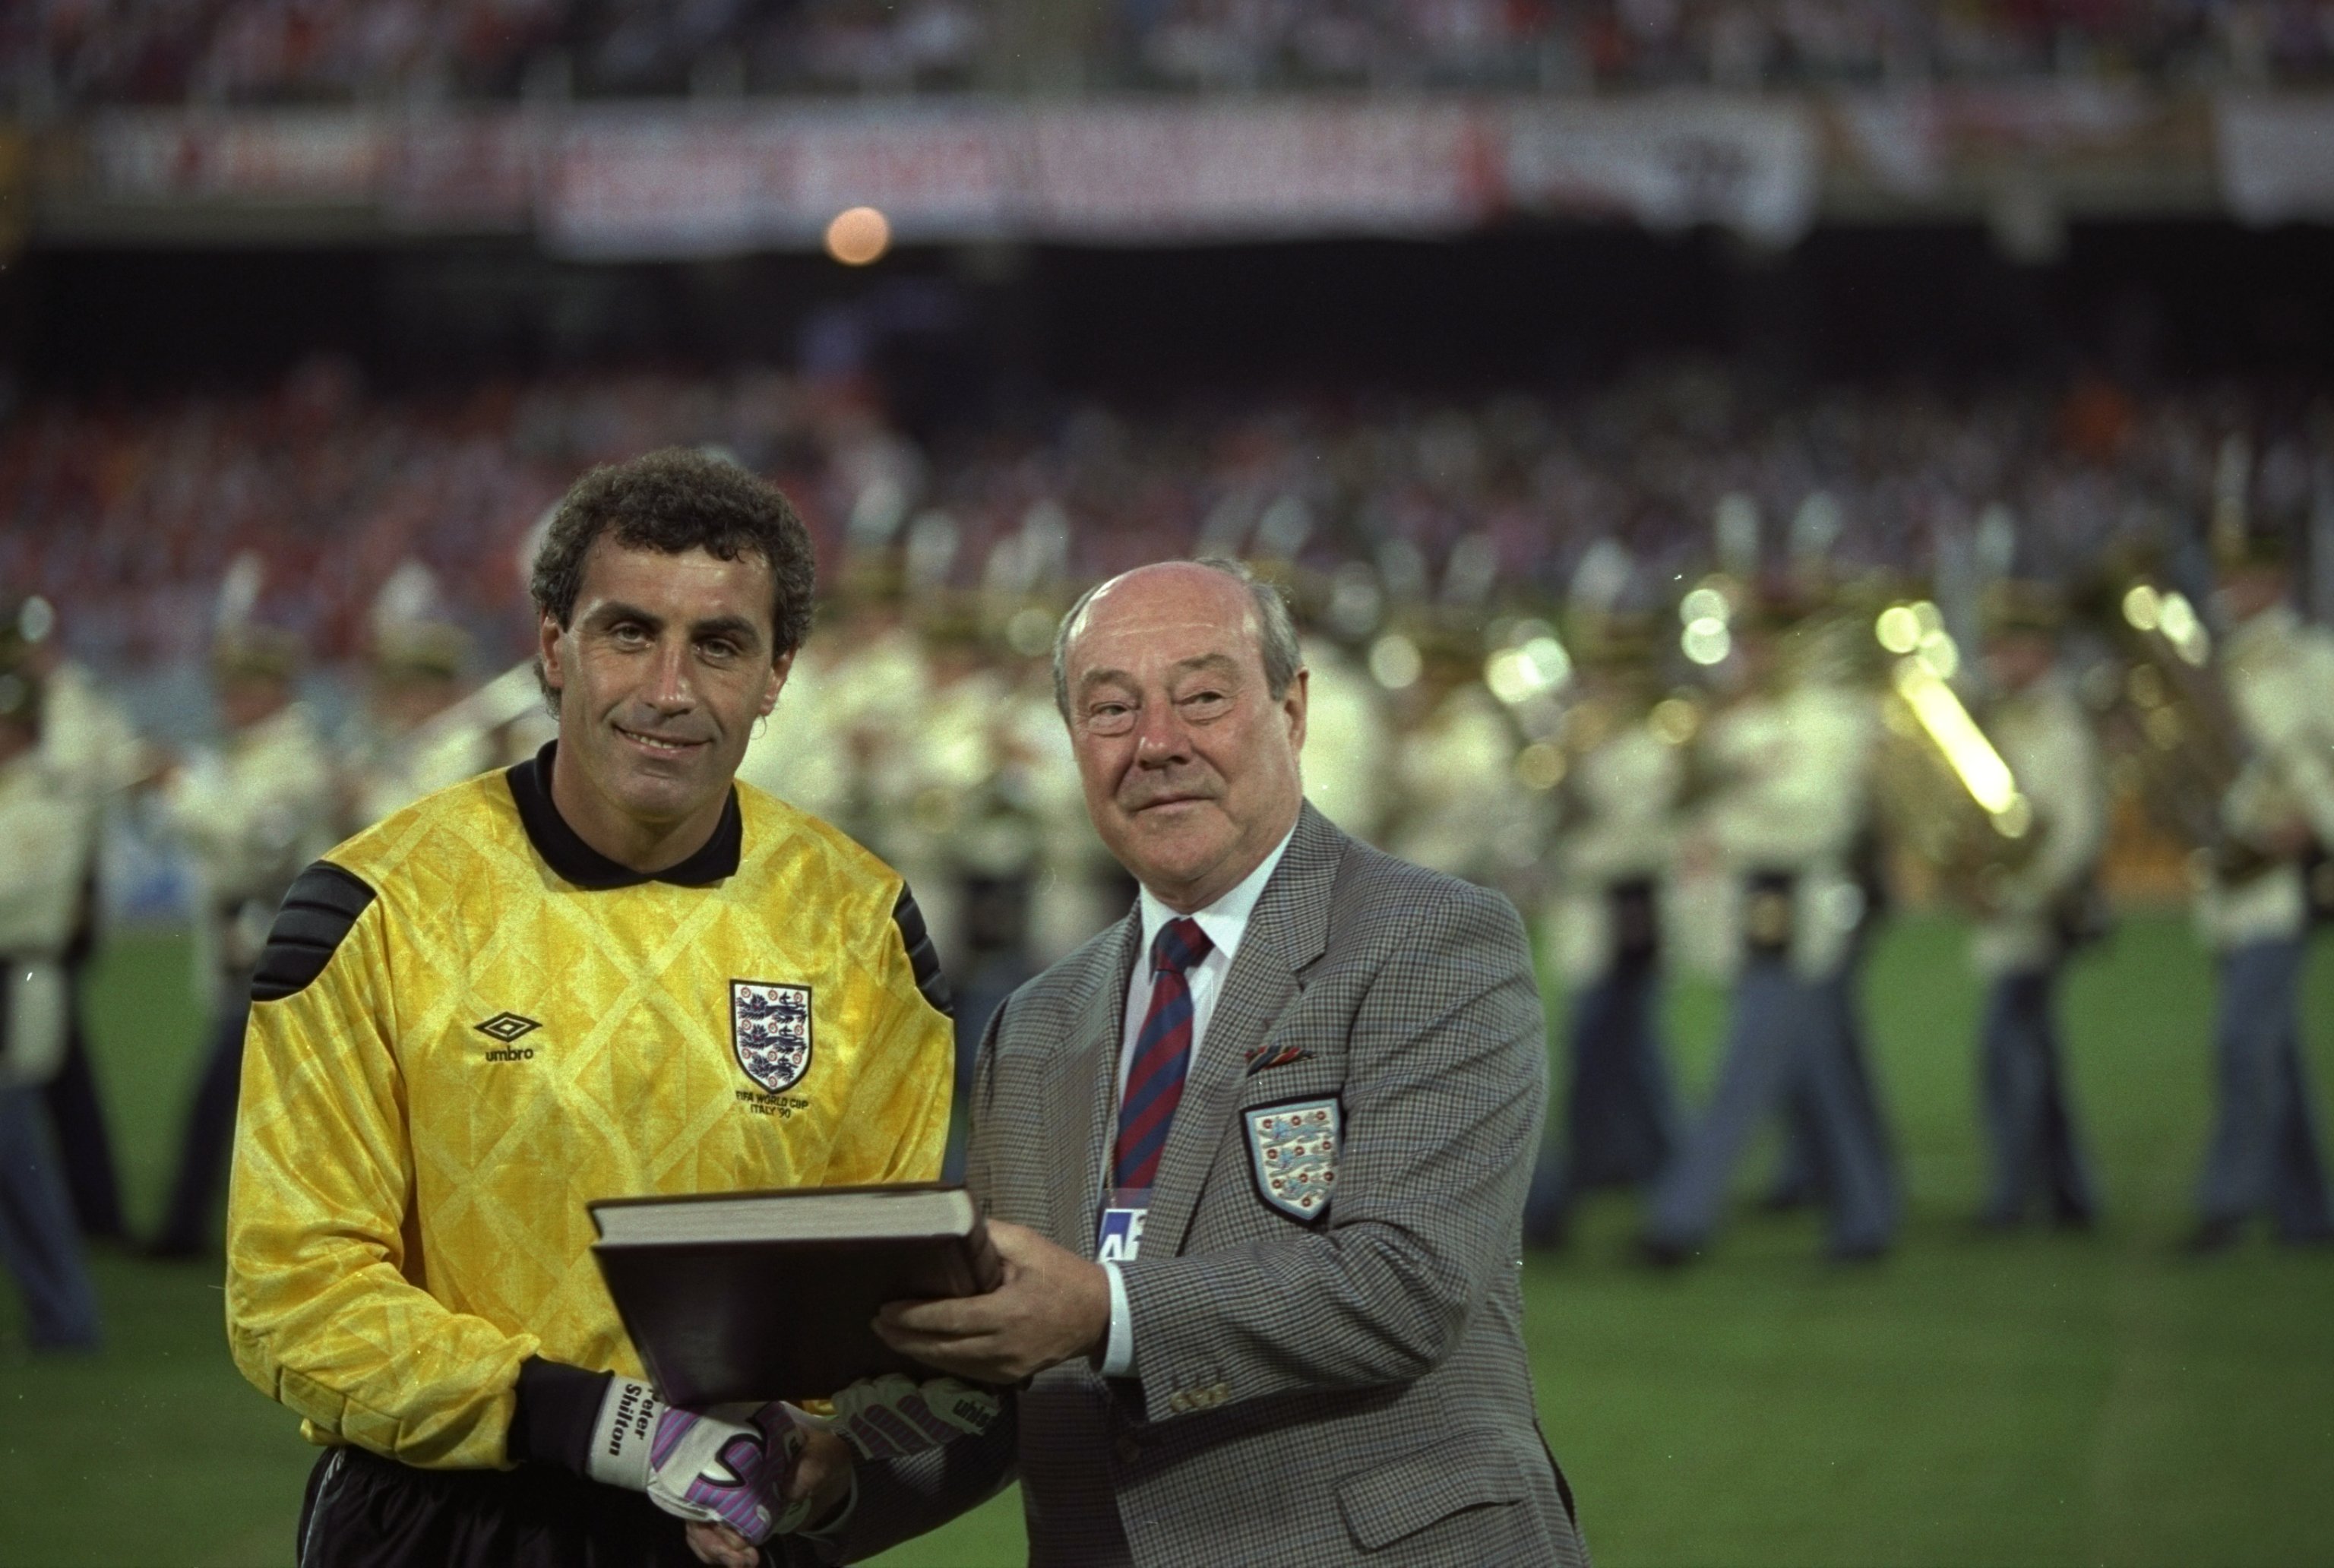 England's most capped player, Peter Shilton